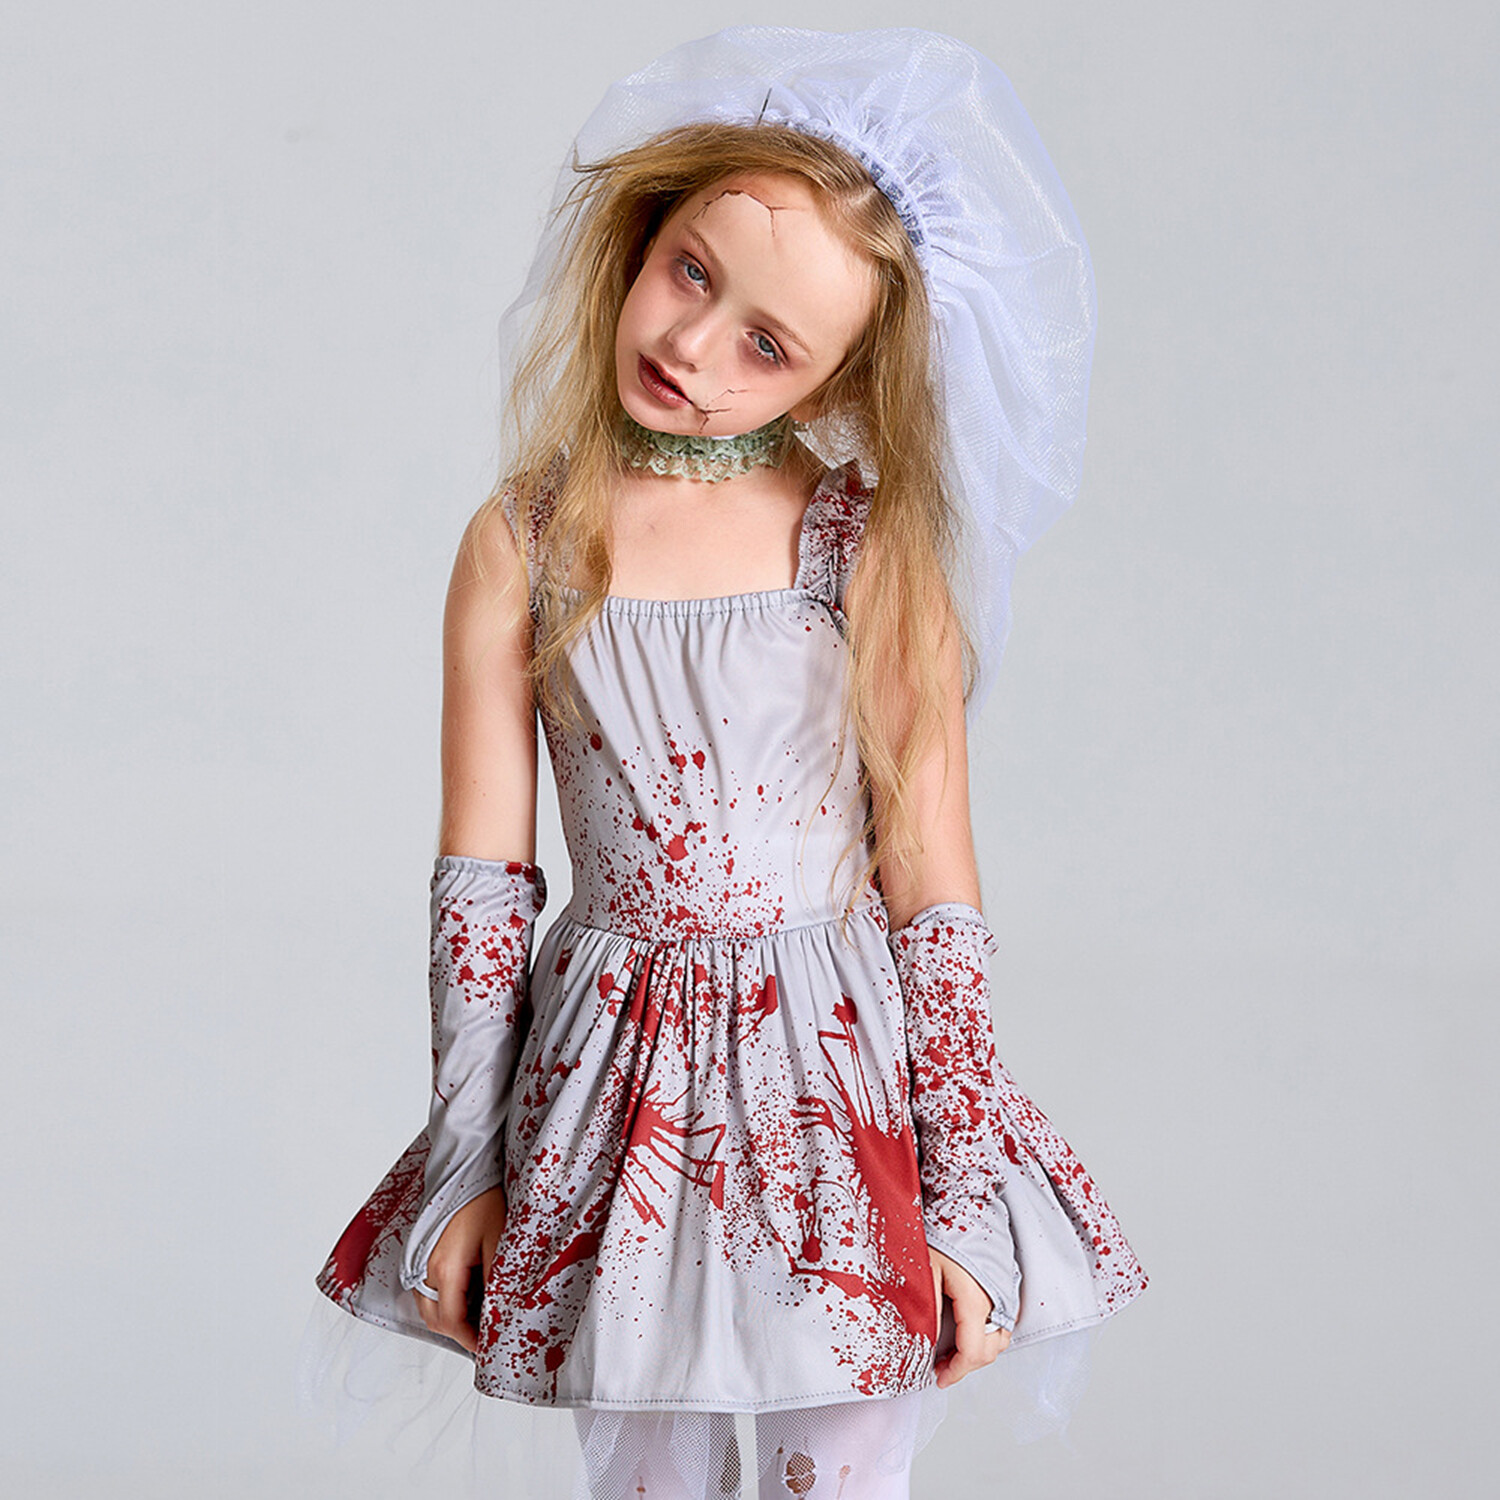 Phenas Girls Scary Bloody Ghost Bride Halloween Costume Horror Ghost Cosplay Dress-up - image 3 of 7